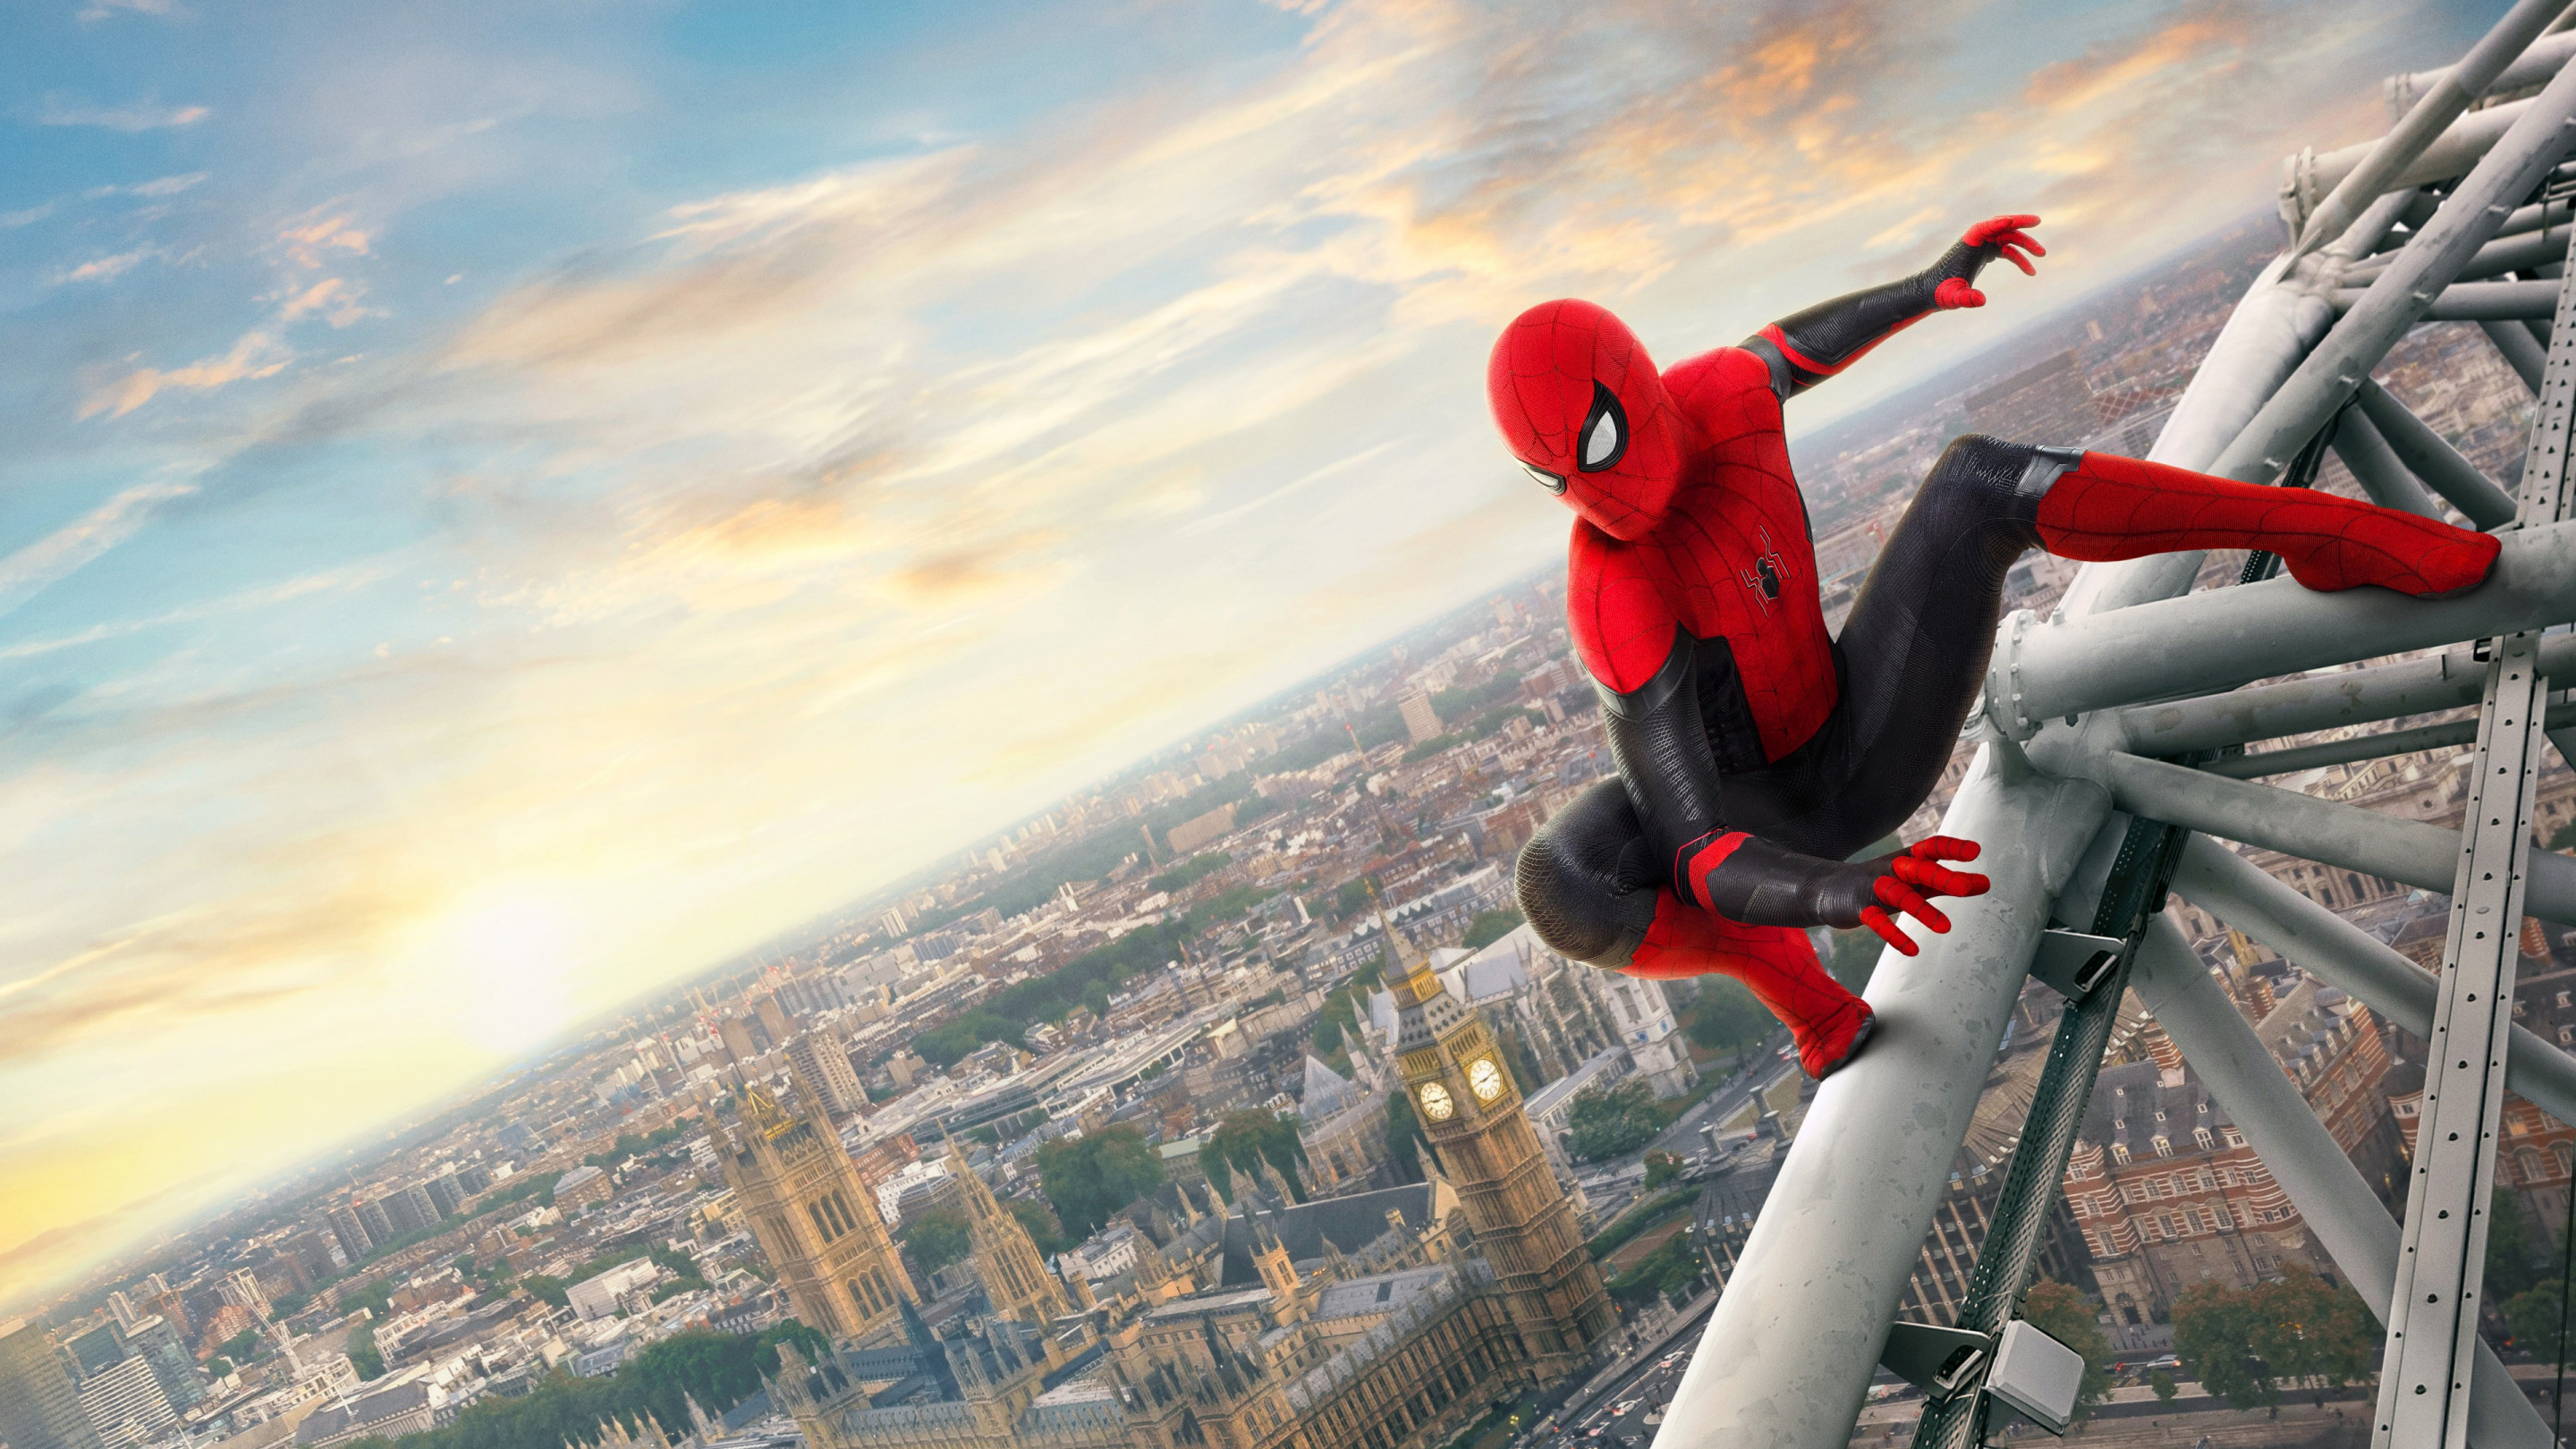 Spider Man: Far From Home 2019 wallpaper 2880x1620